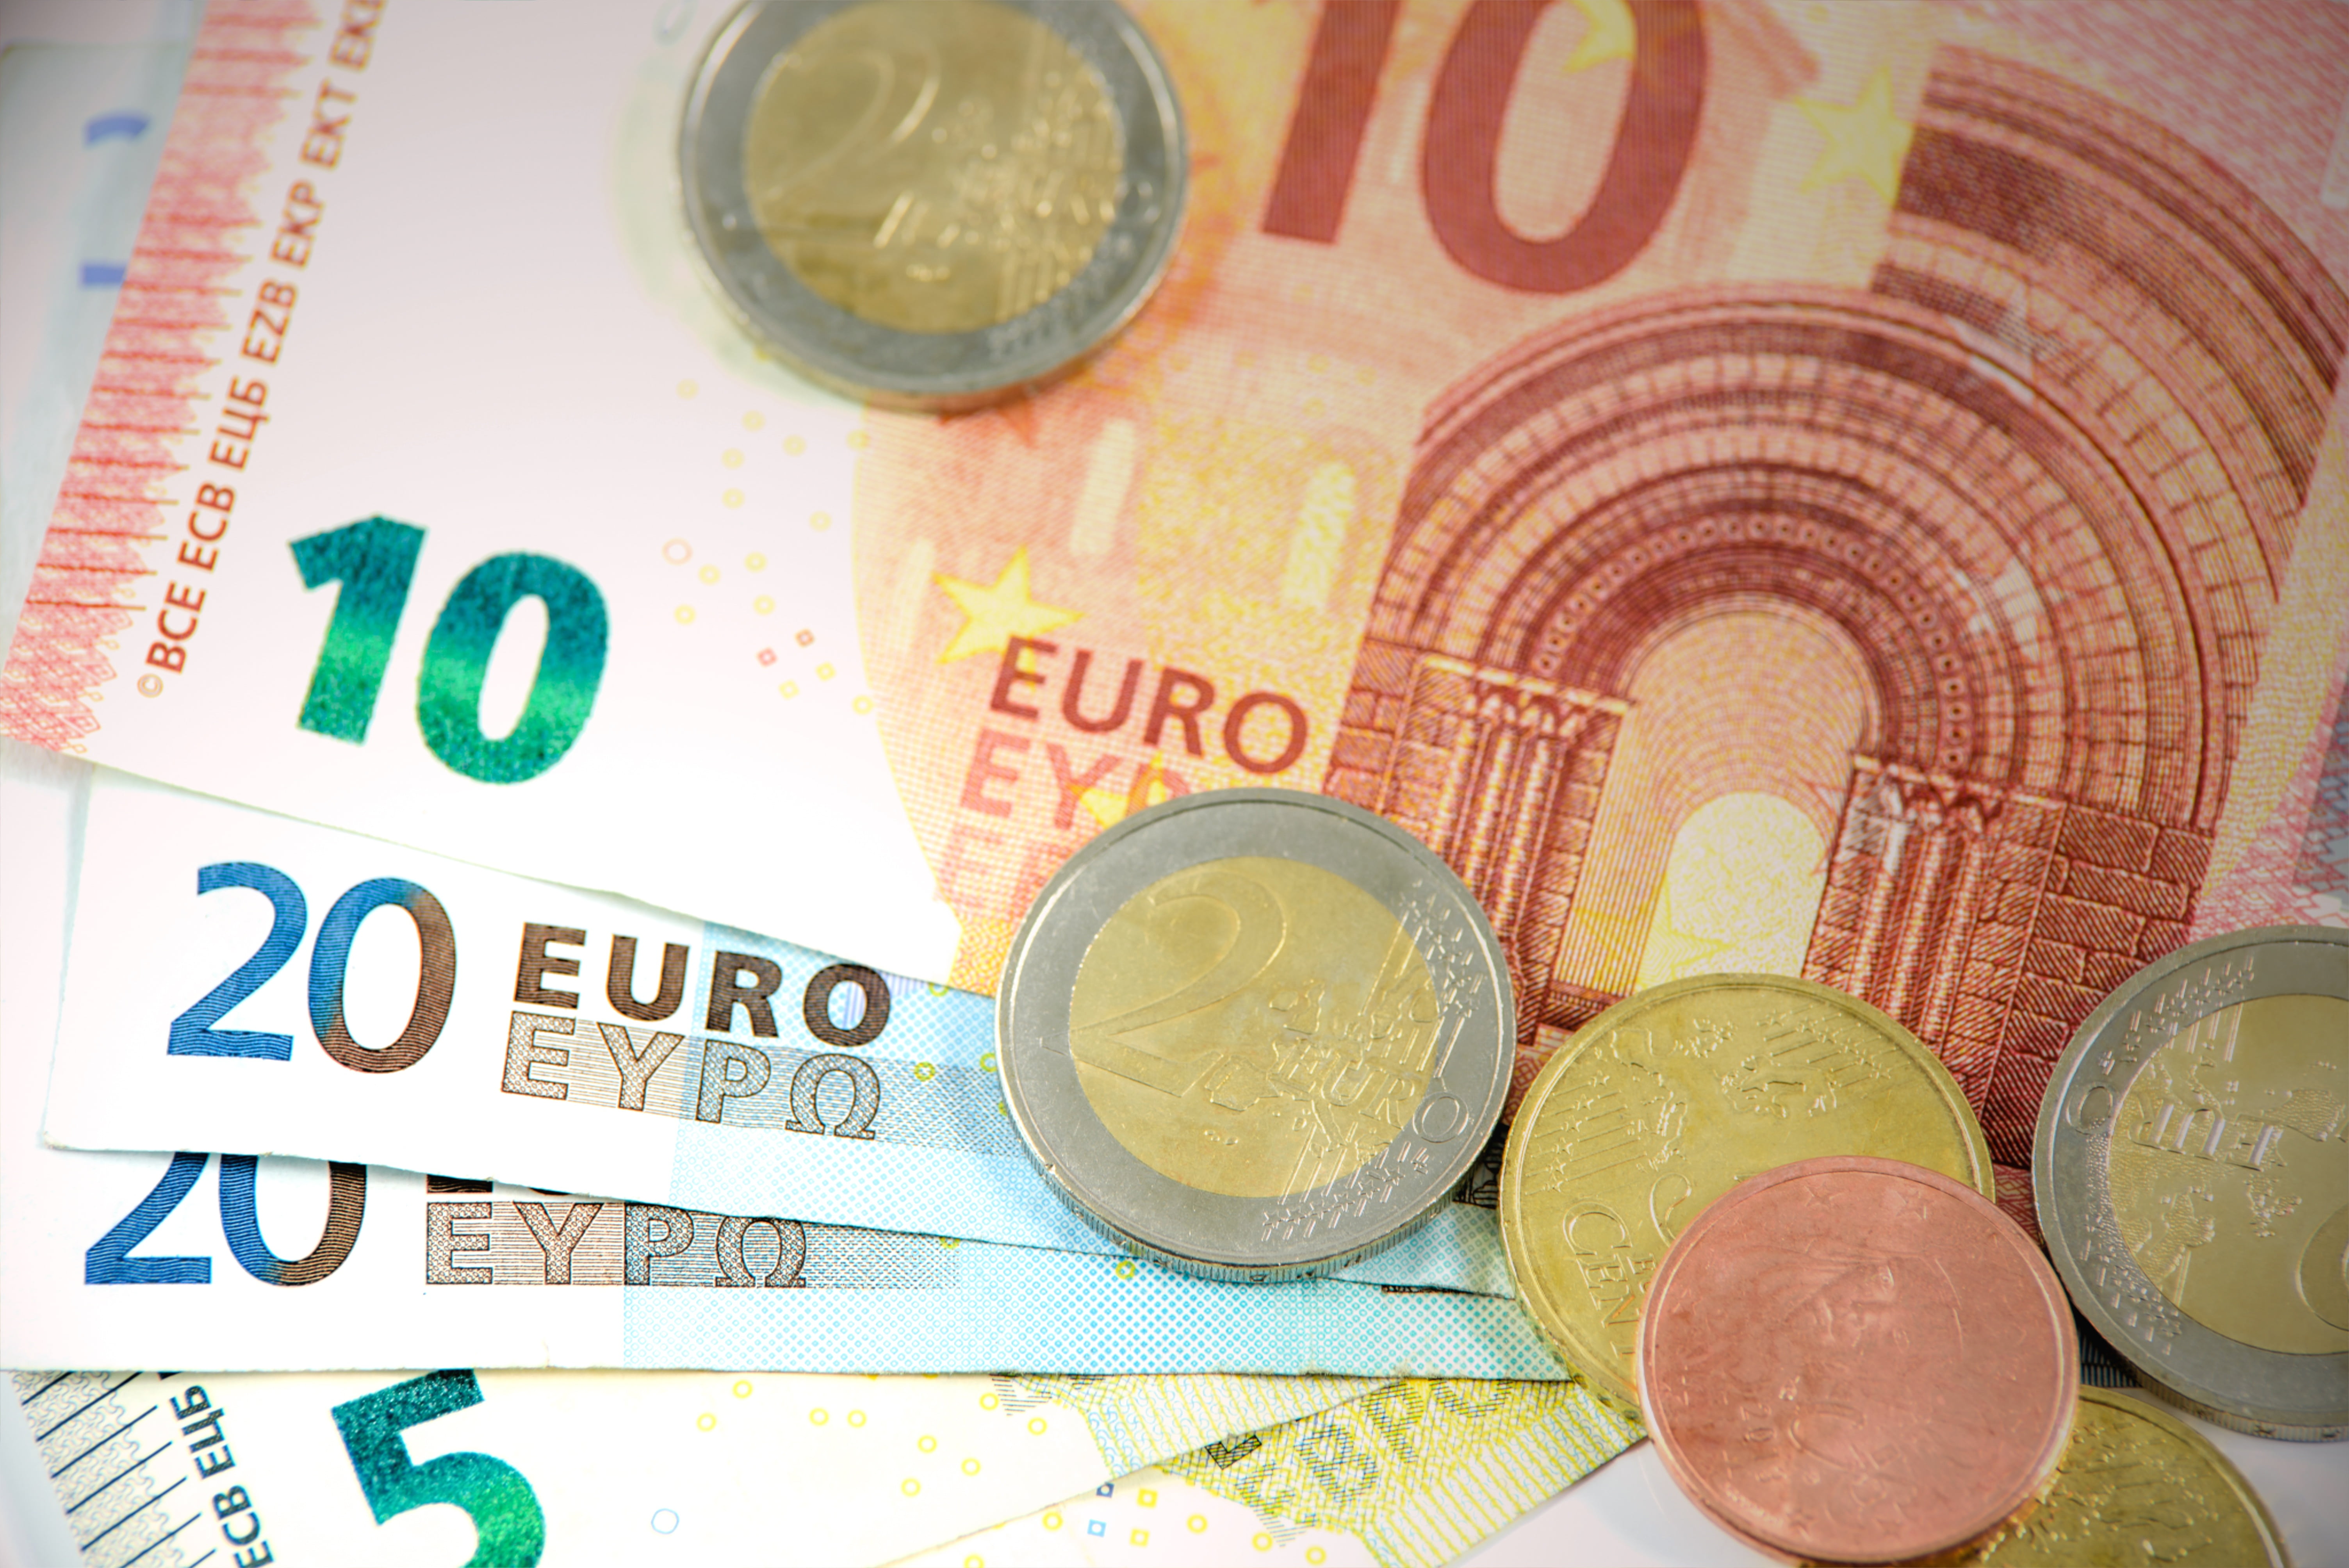 Royalty-Free photo: Stack of assorted Euro banknotes